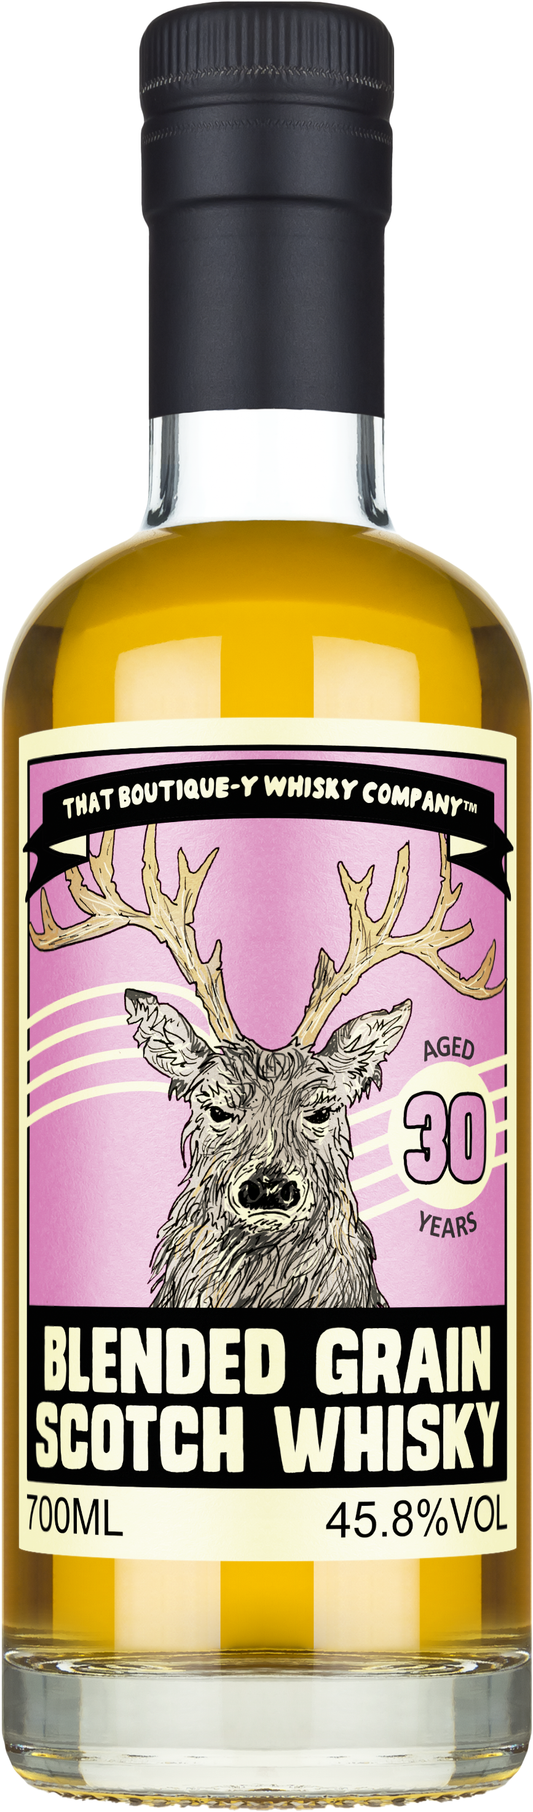 That Boutique-Y Whisky Company 30 Year Old Blended Grain Scotch Whisky 700ml